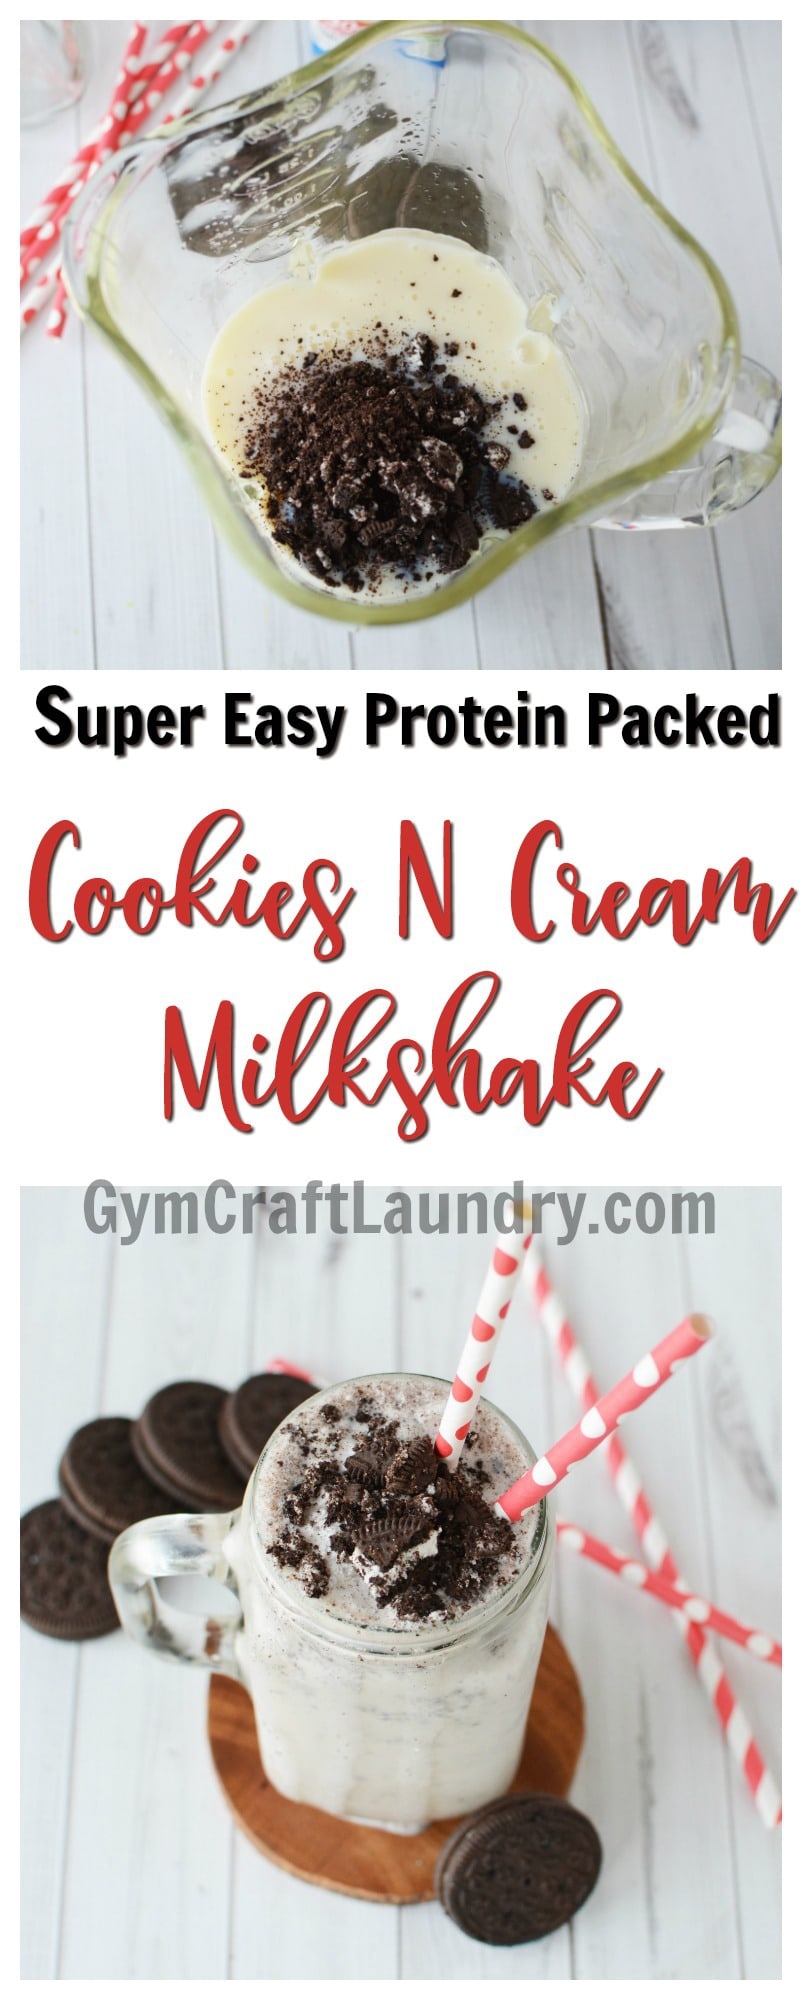 This protein smoothie makes healthier choices taste less boring! Try this easy and delicious Cookies and Cream Protein Milk Shake #gymcraftlaundry